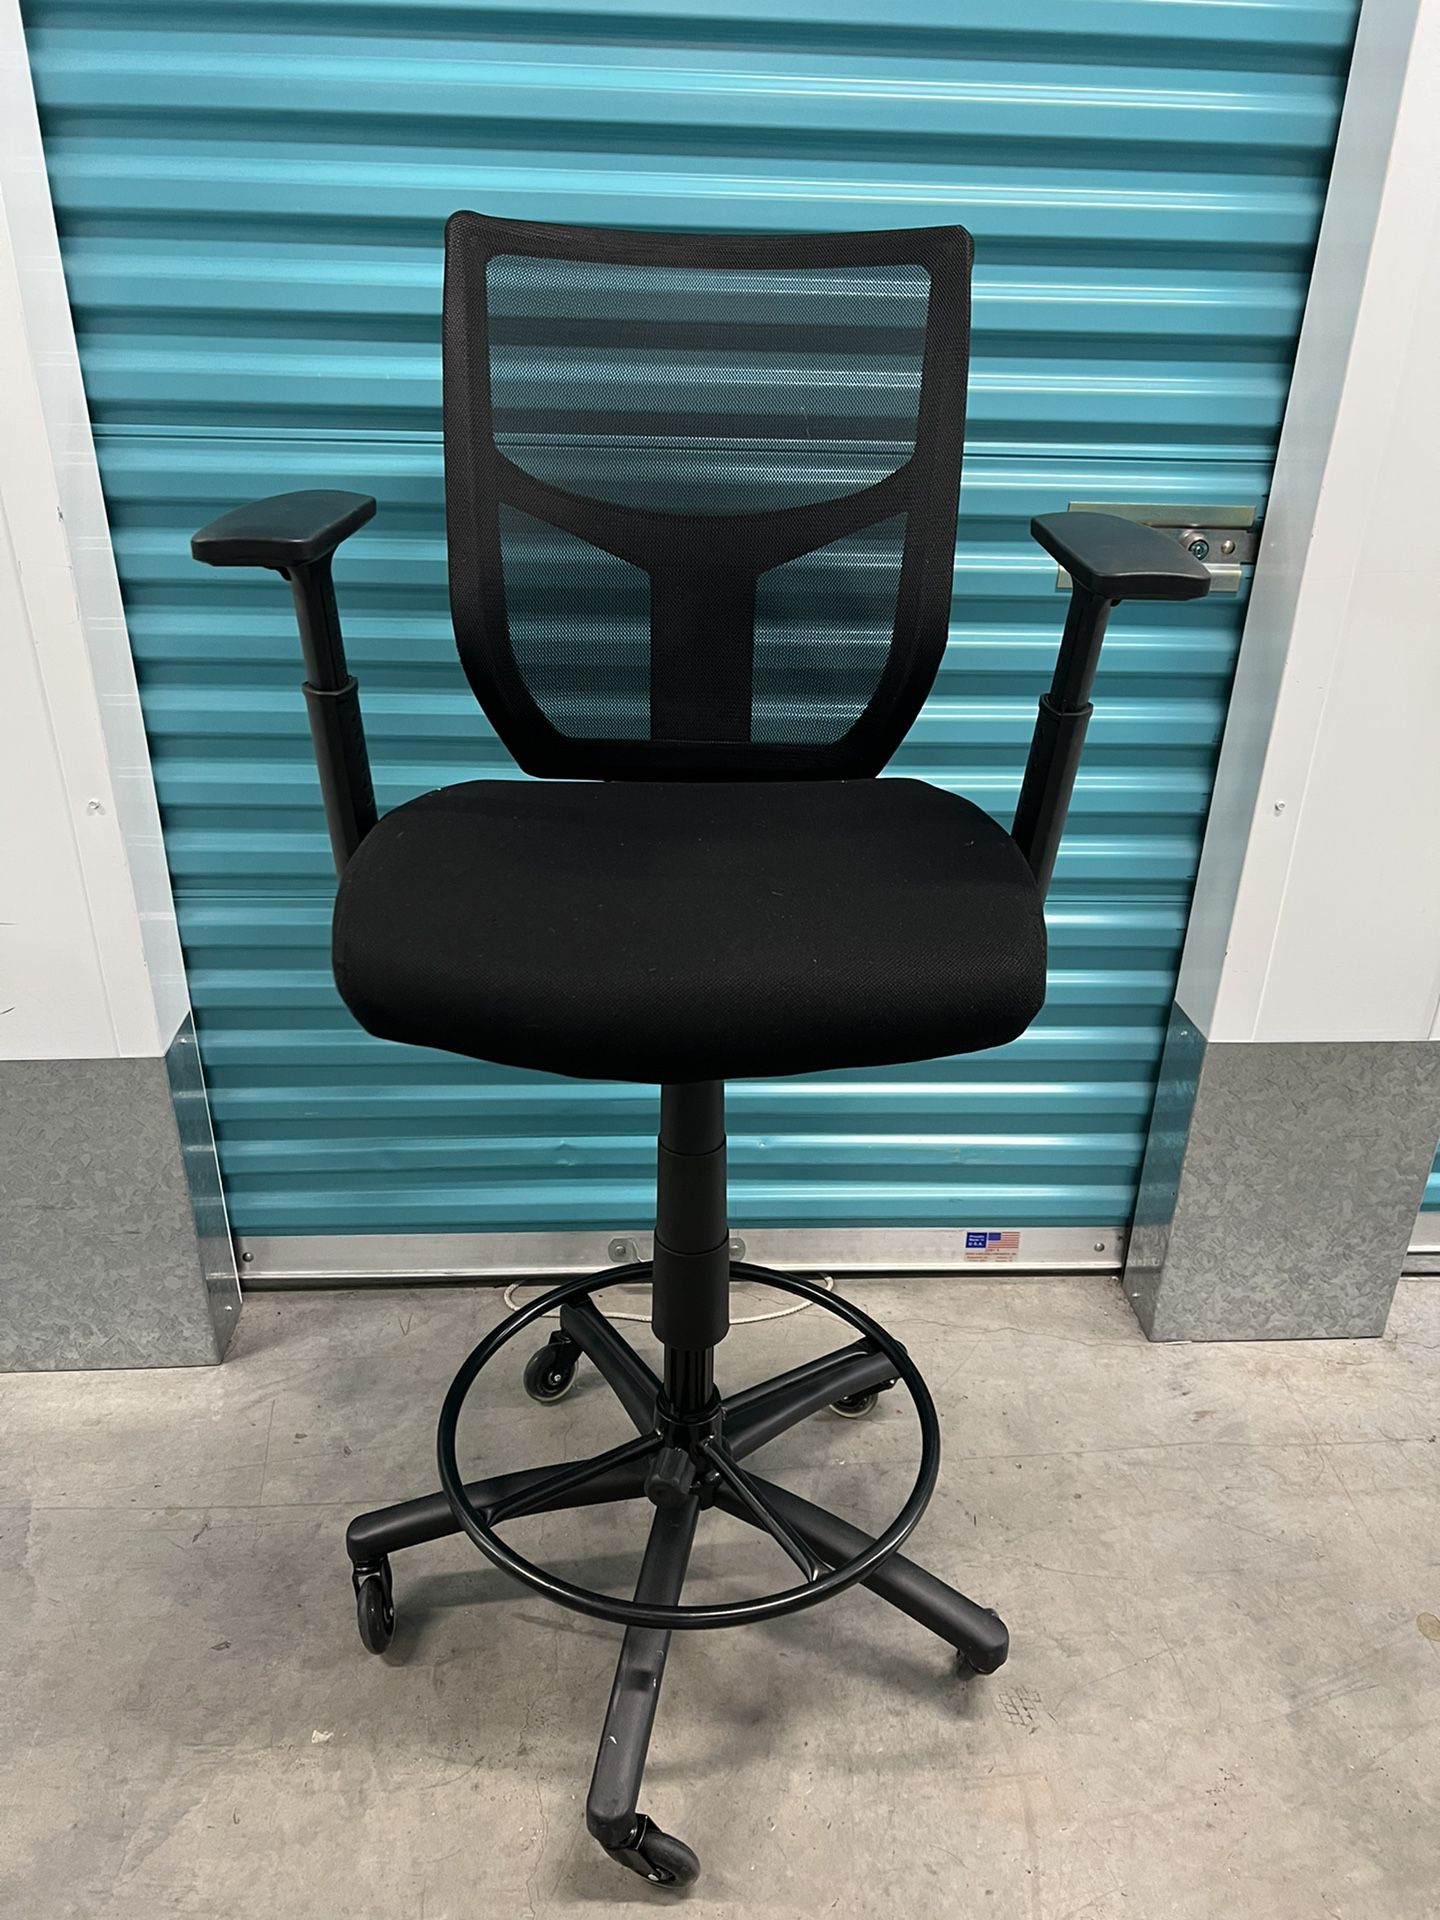 Drafting Chair - Tall Office Chair for Standing Desk, High Work Stool, Counter H